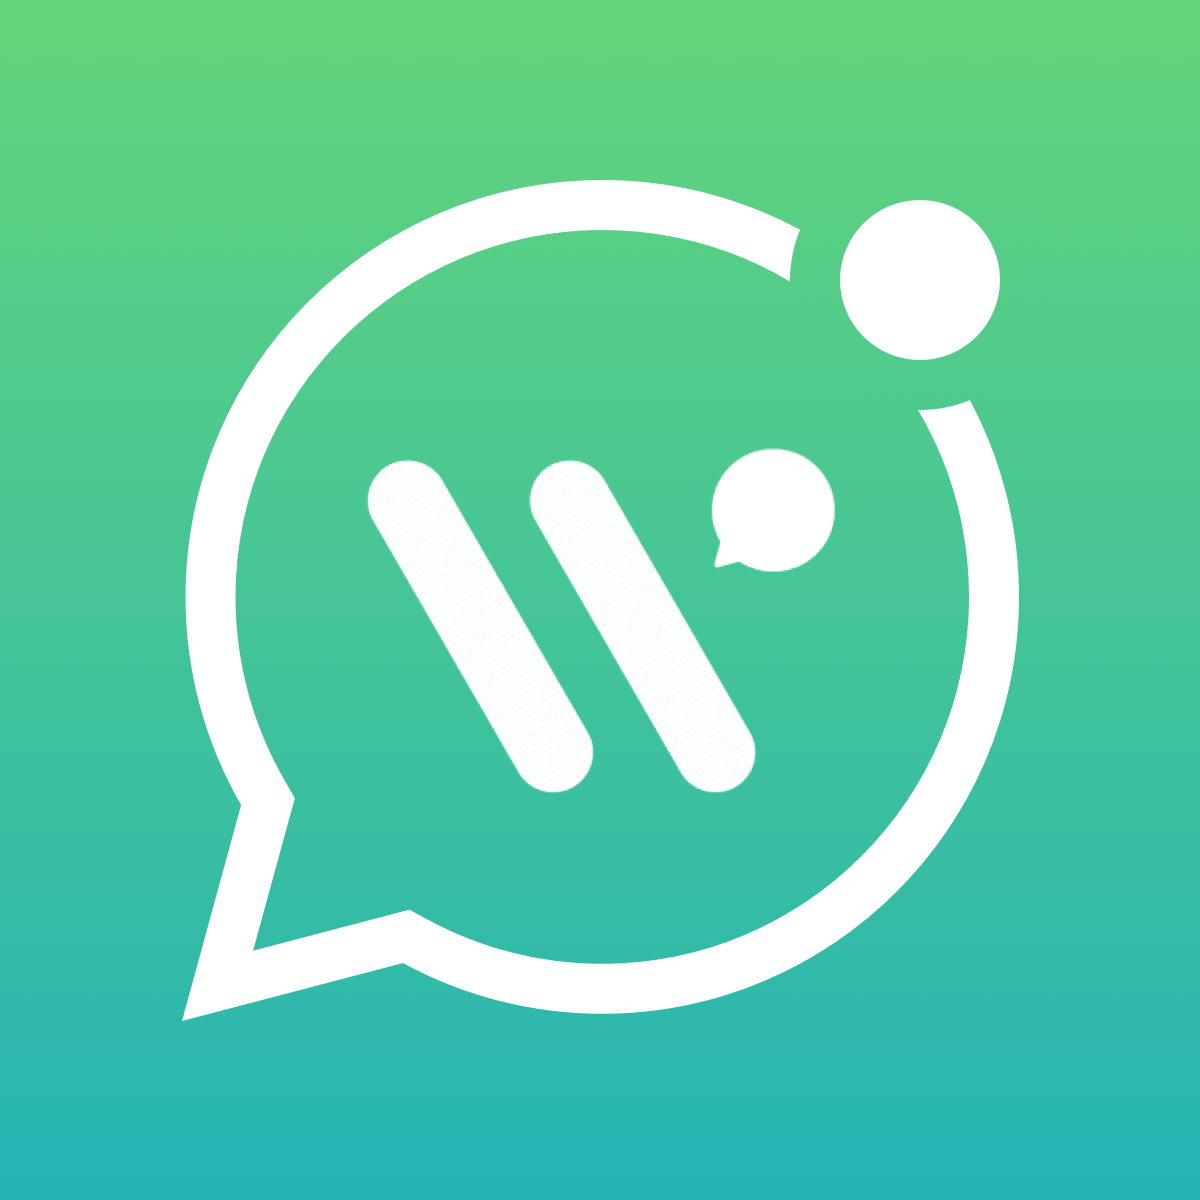 Hire Shopify Experts to integrate WhatsApp Chat & Abandoned Cart app into a Shopify store